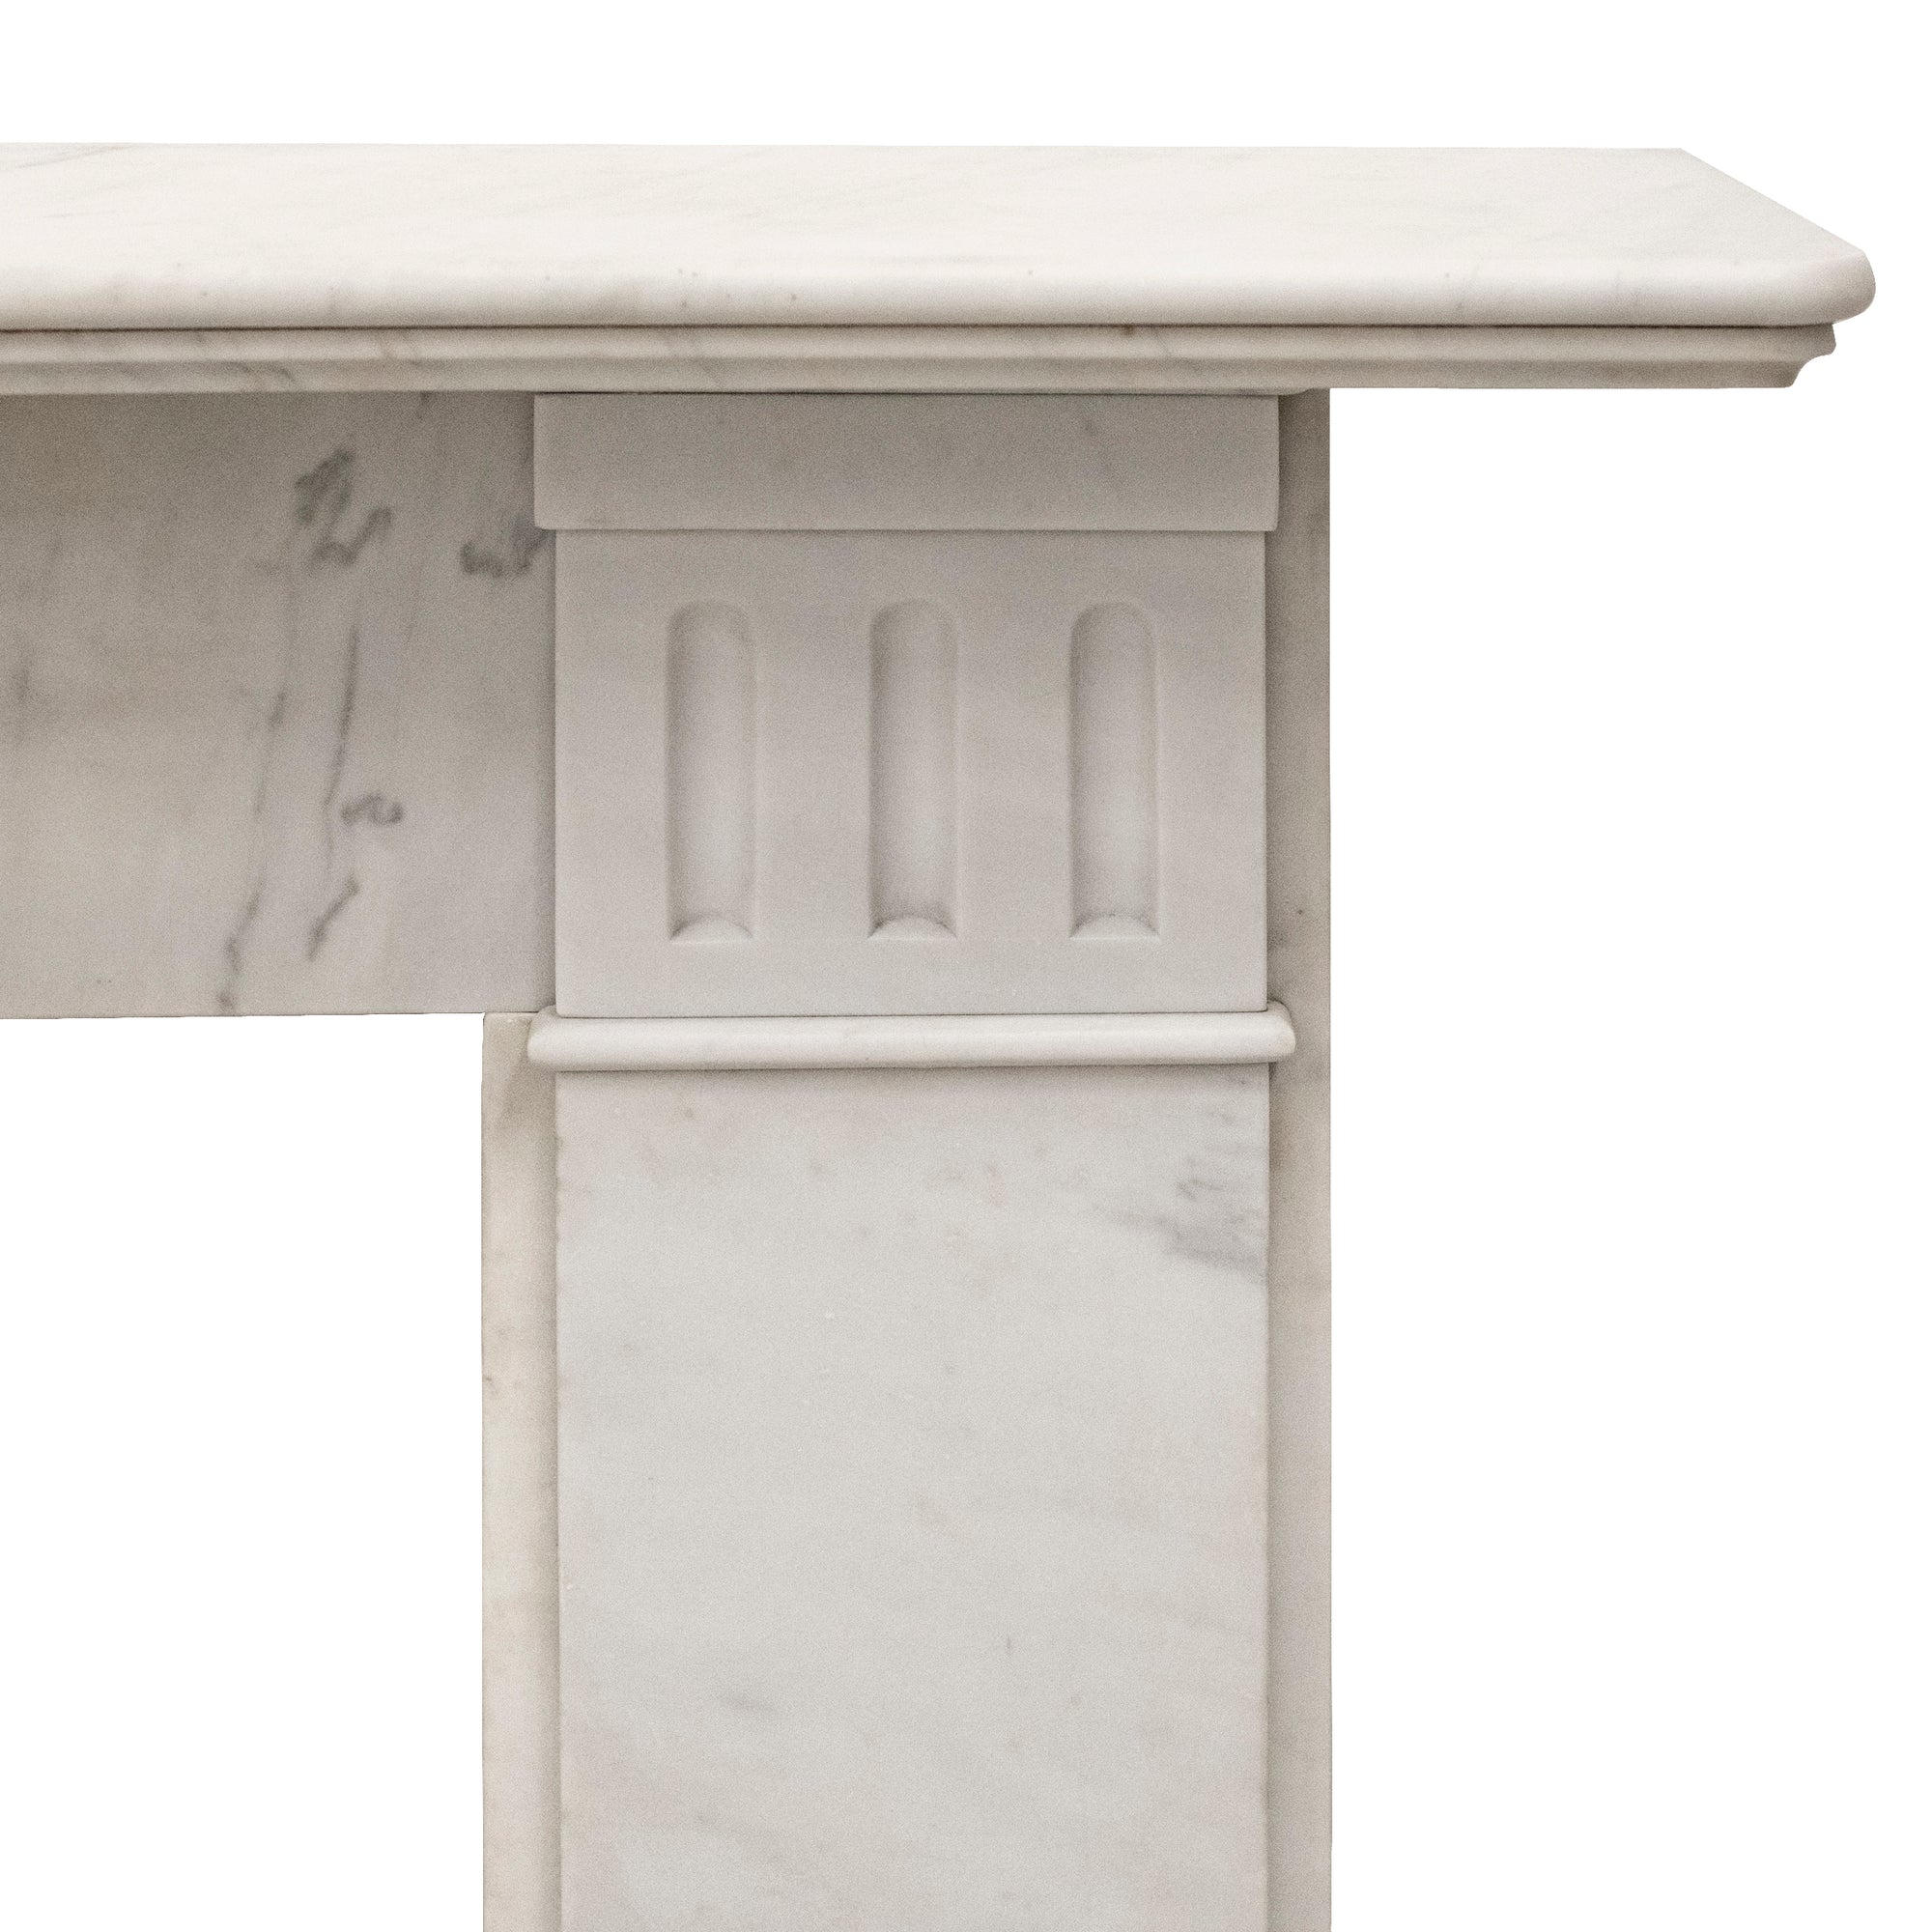 Antique Carrara Marble Fireplace Surround | The Architectural Forum